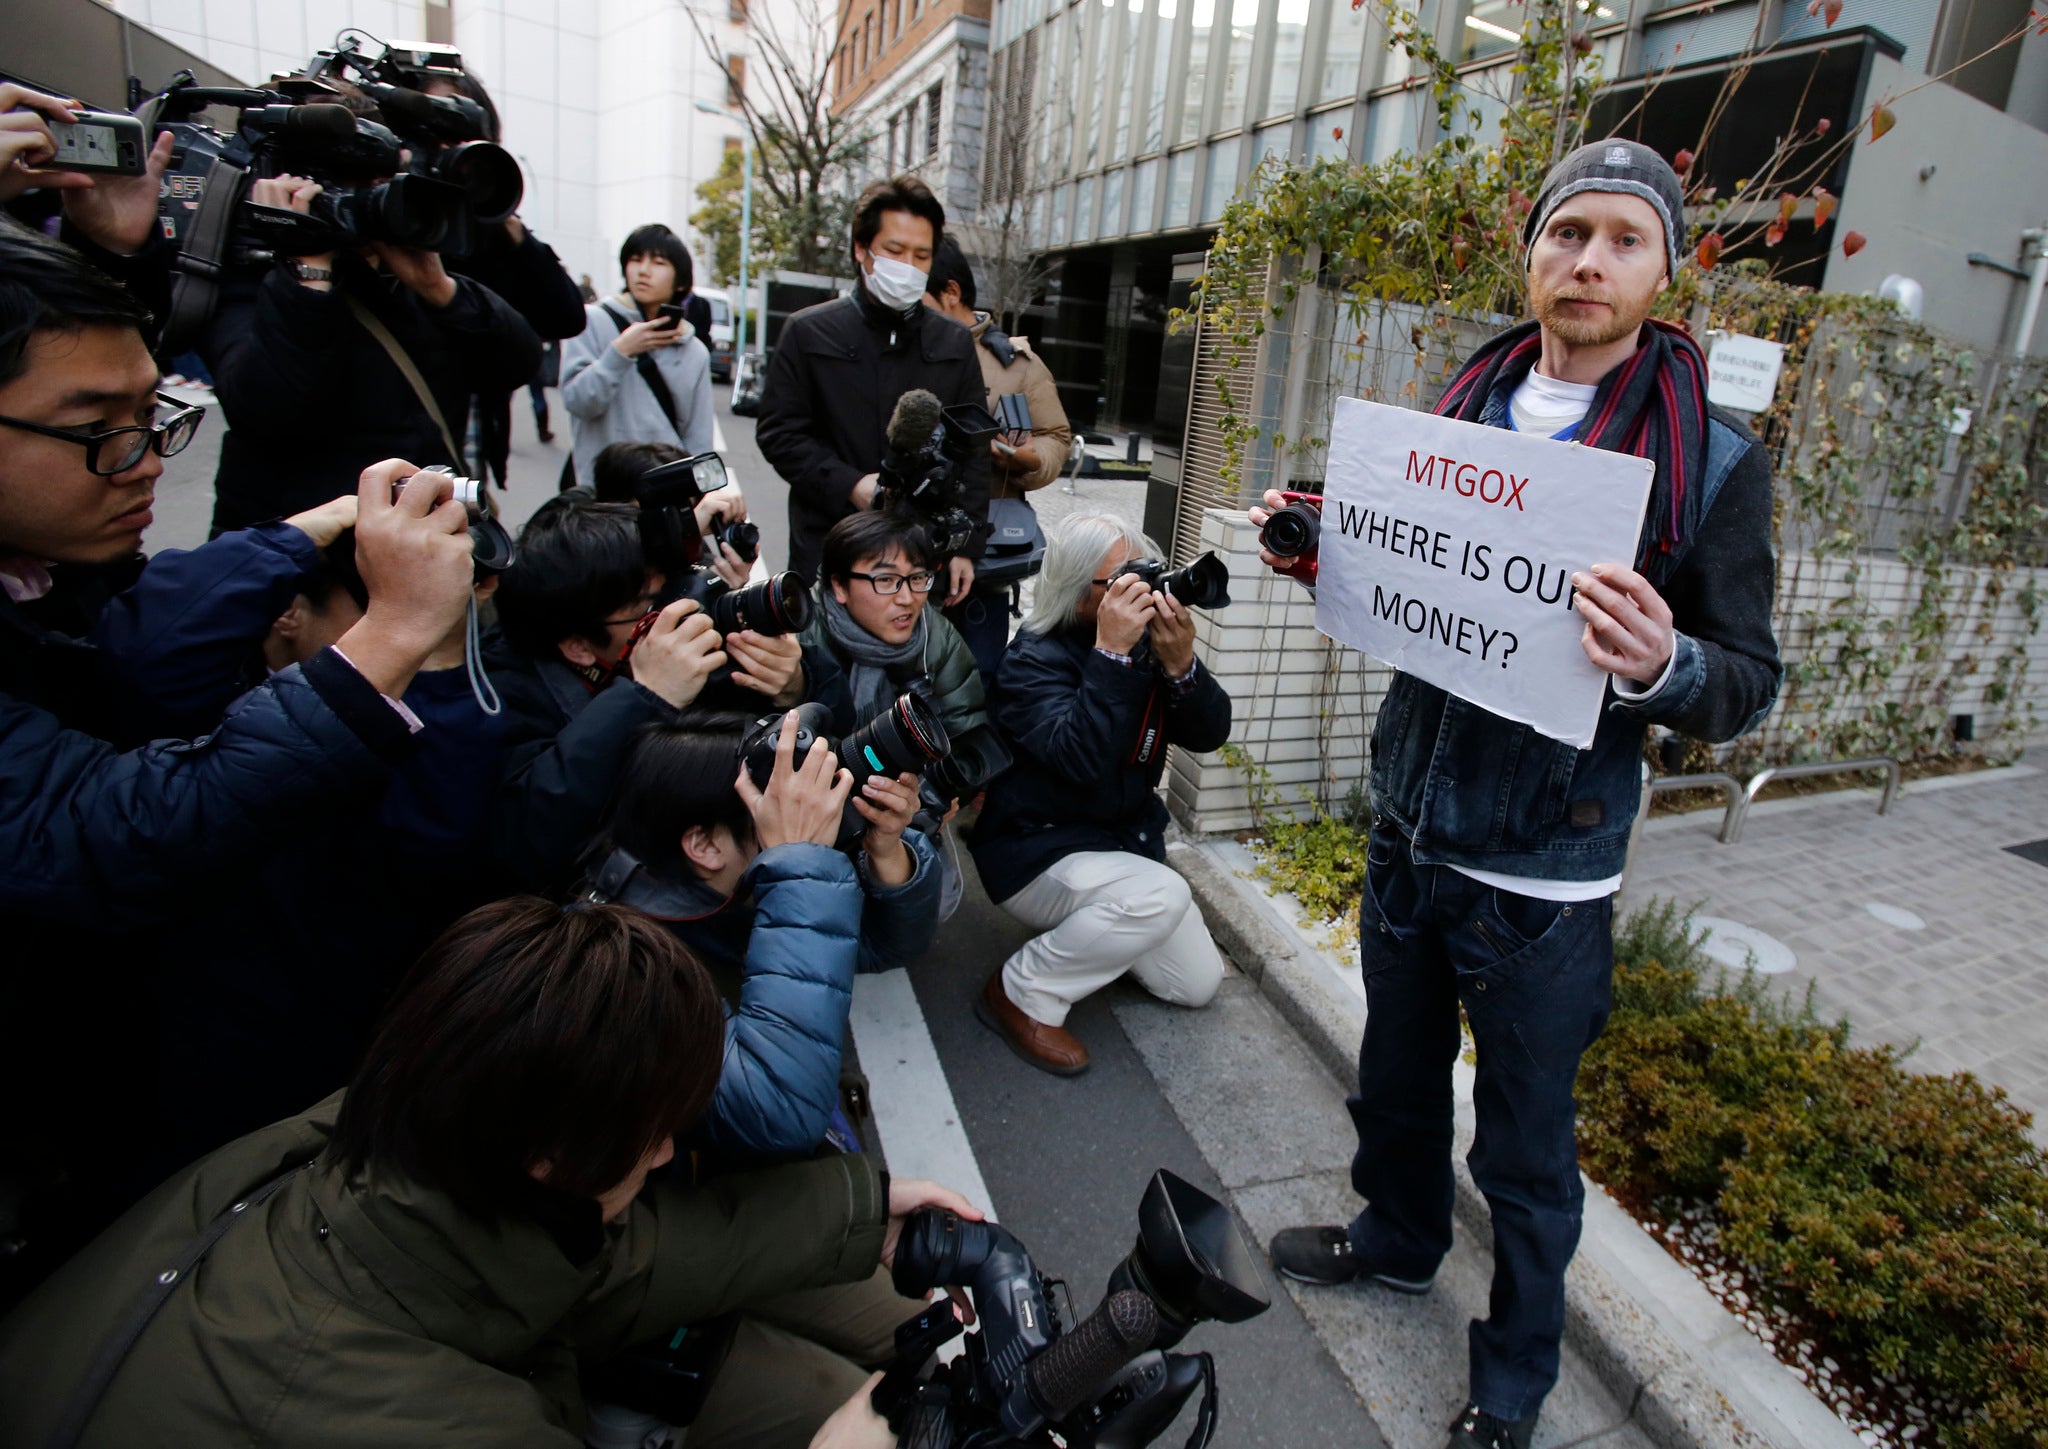 Kolin Burges (R), a self-styled cryptocurrency trader and former software engineer from London, holds a placard to protest against Mt. Gox, as photographers take photos of him in front of the building where the digital marketplace operator was formerly housed in Tokyo February 26, 2014.